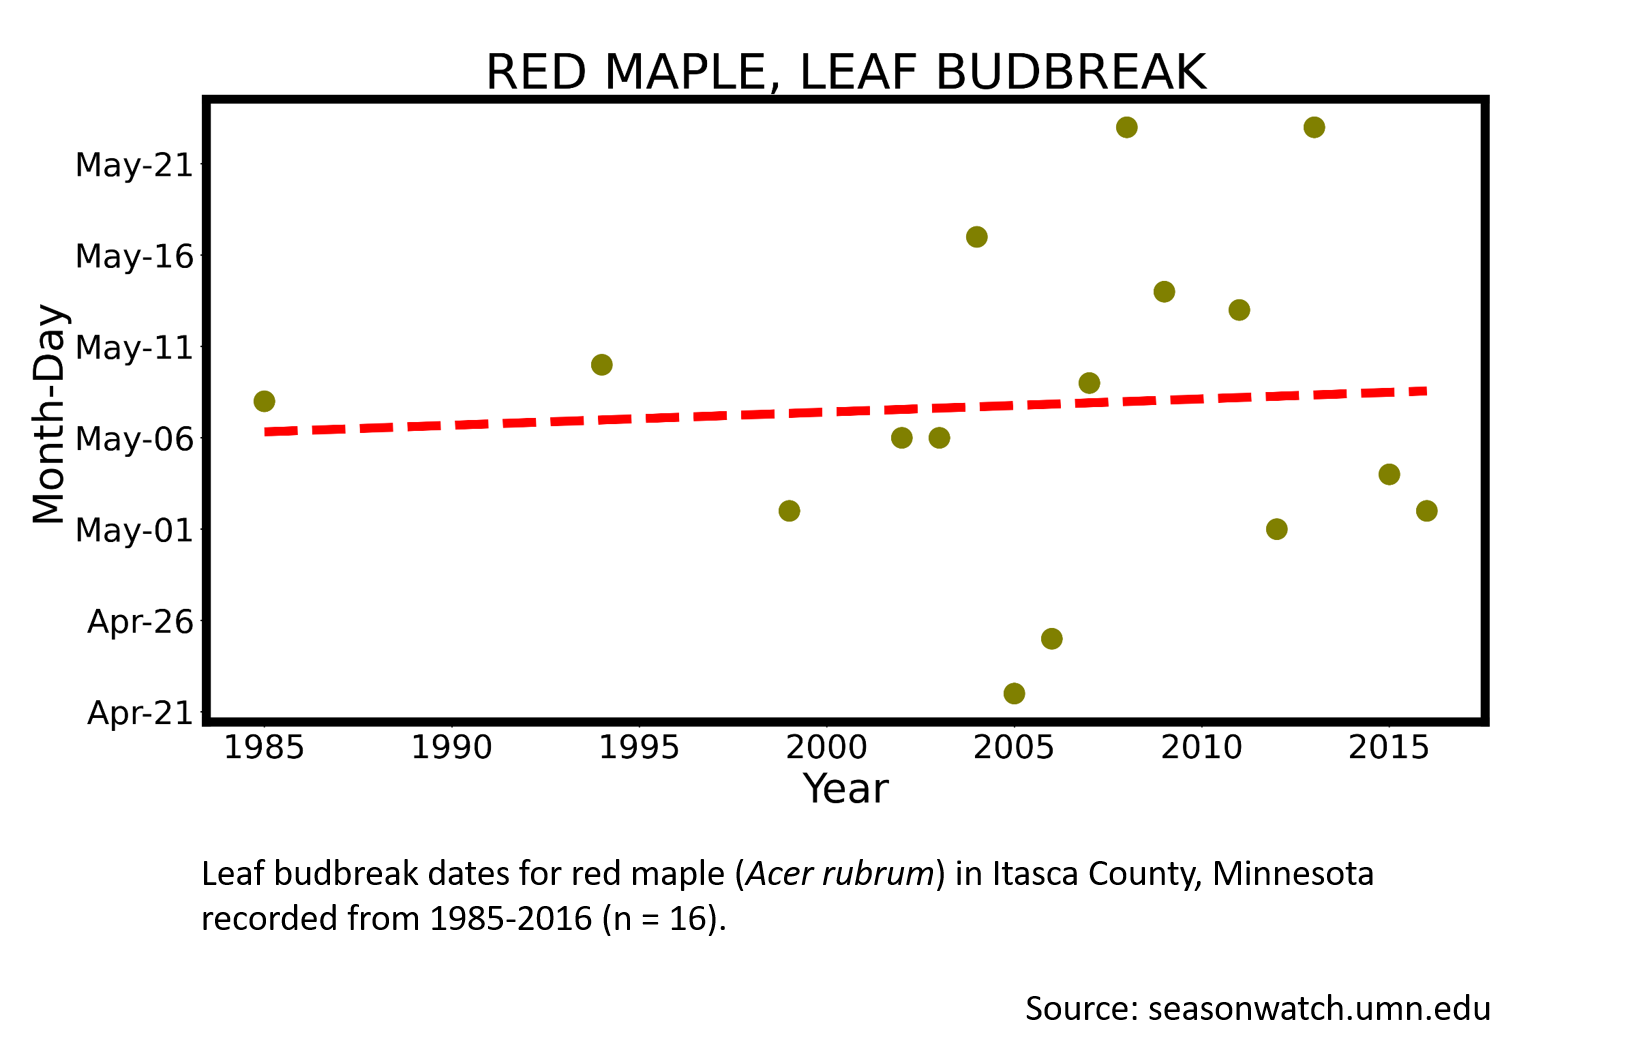 Scatterplot showing red maple phenology observations in Itasca County, Minnesota